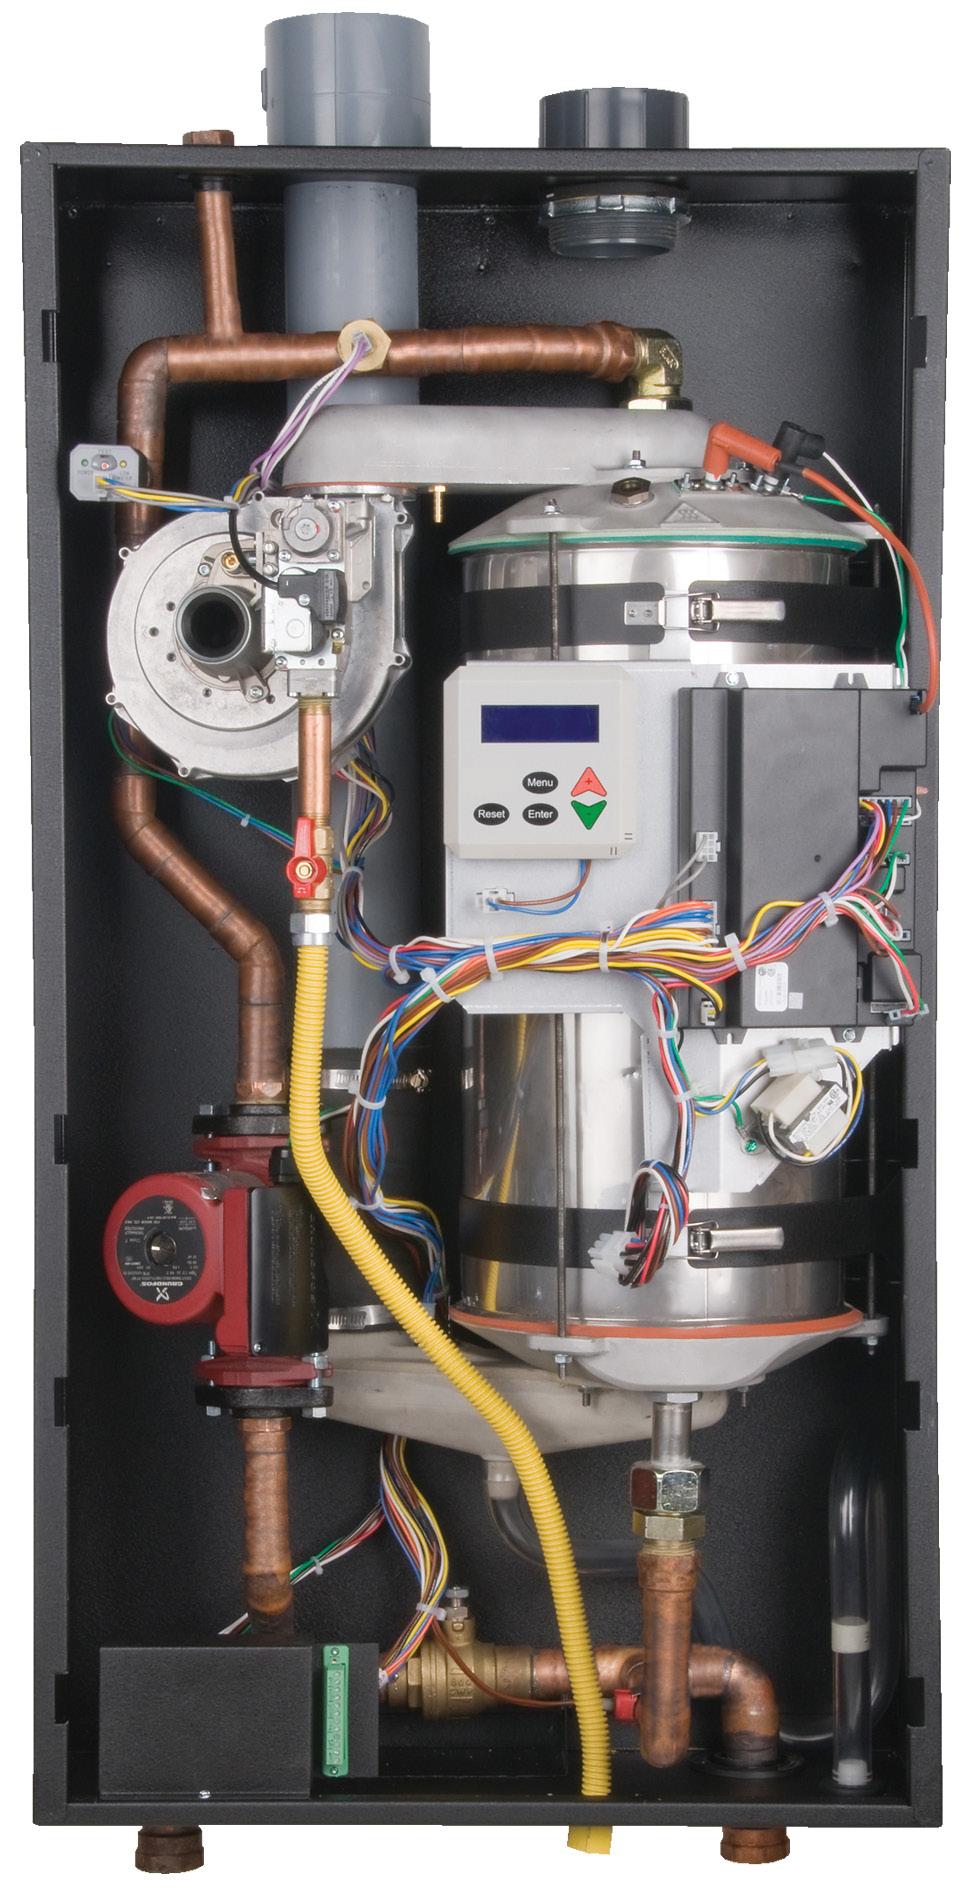 Self-cleaning design helps to remove hard water desposits and prevent scaling. Sight glass on top of heat exchanger permits easy viewing of the burner flame.